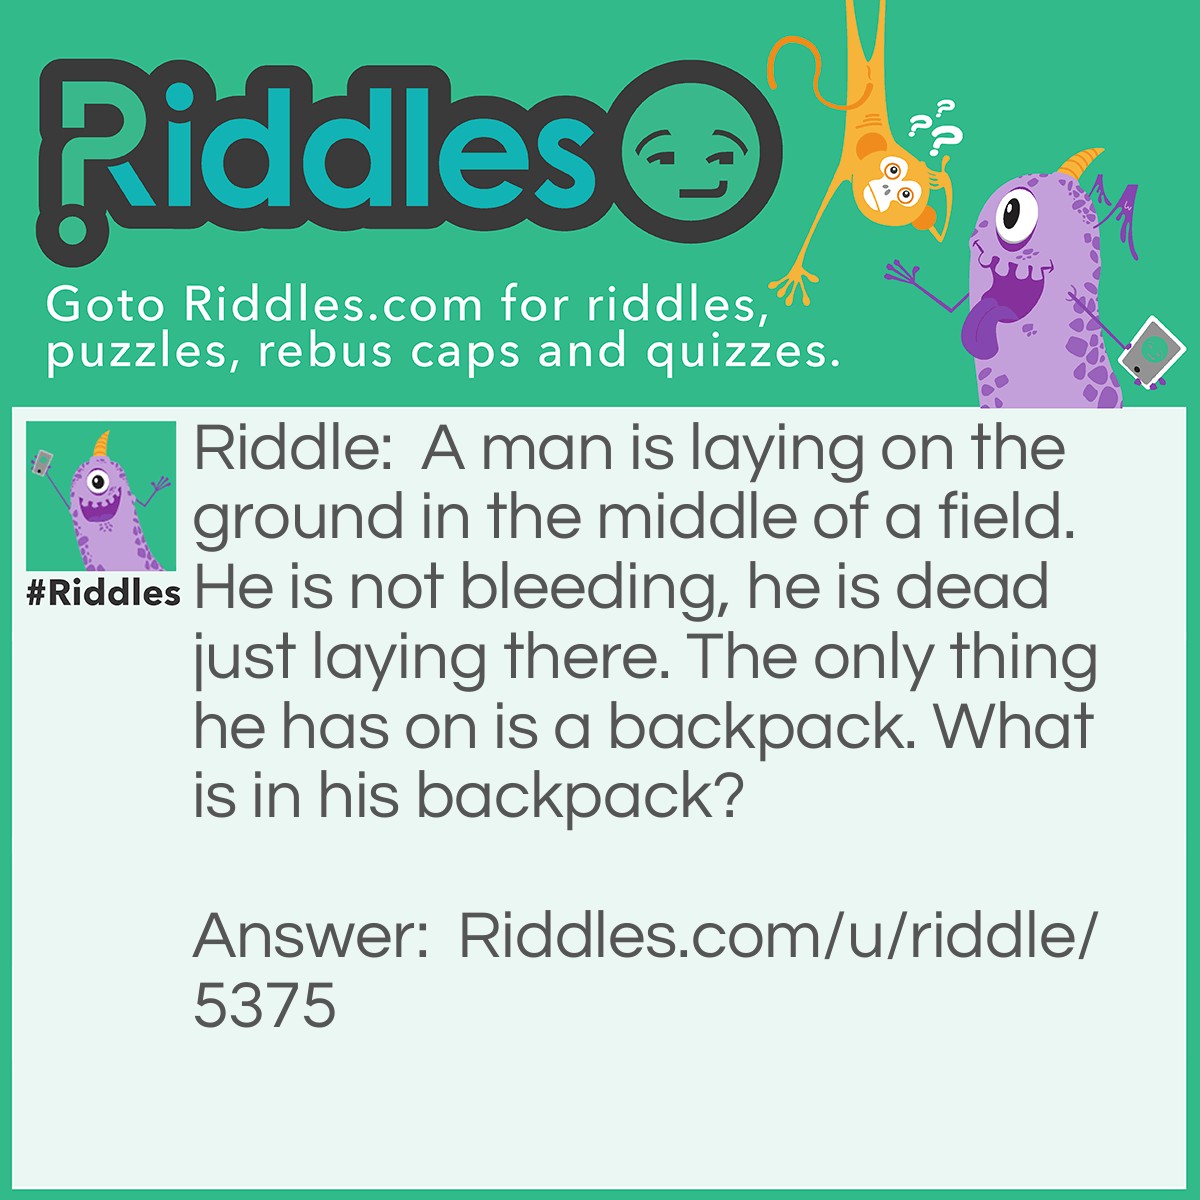 Riddle: A man is laying on the ground in the middle of a field. He is not bleeding, he is dead just laying there. The only thing he has on is a backpack. What is in his backpack? Answer: A parachute that should have come out when he fell.